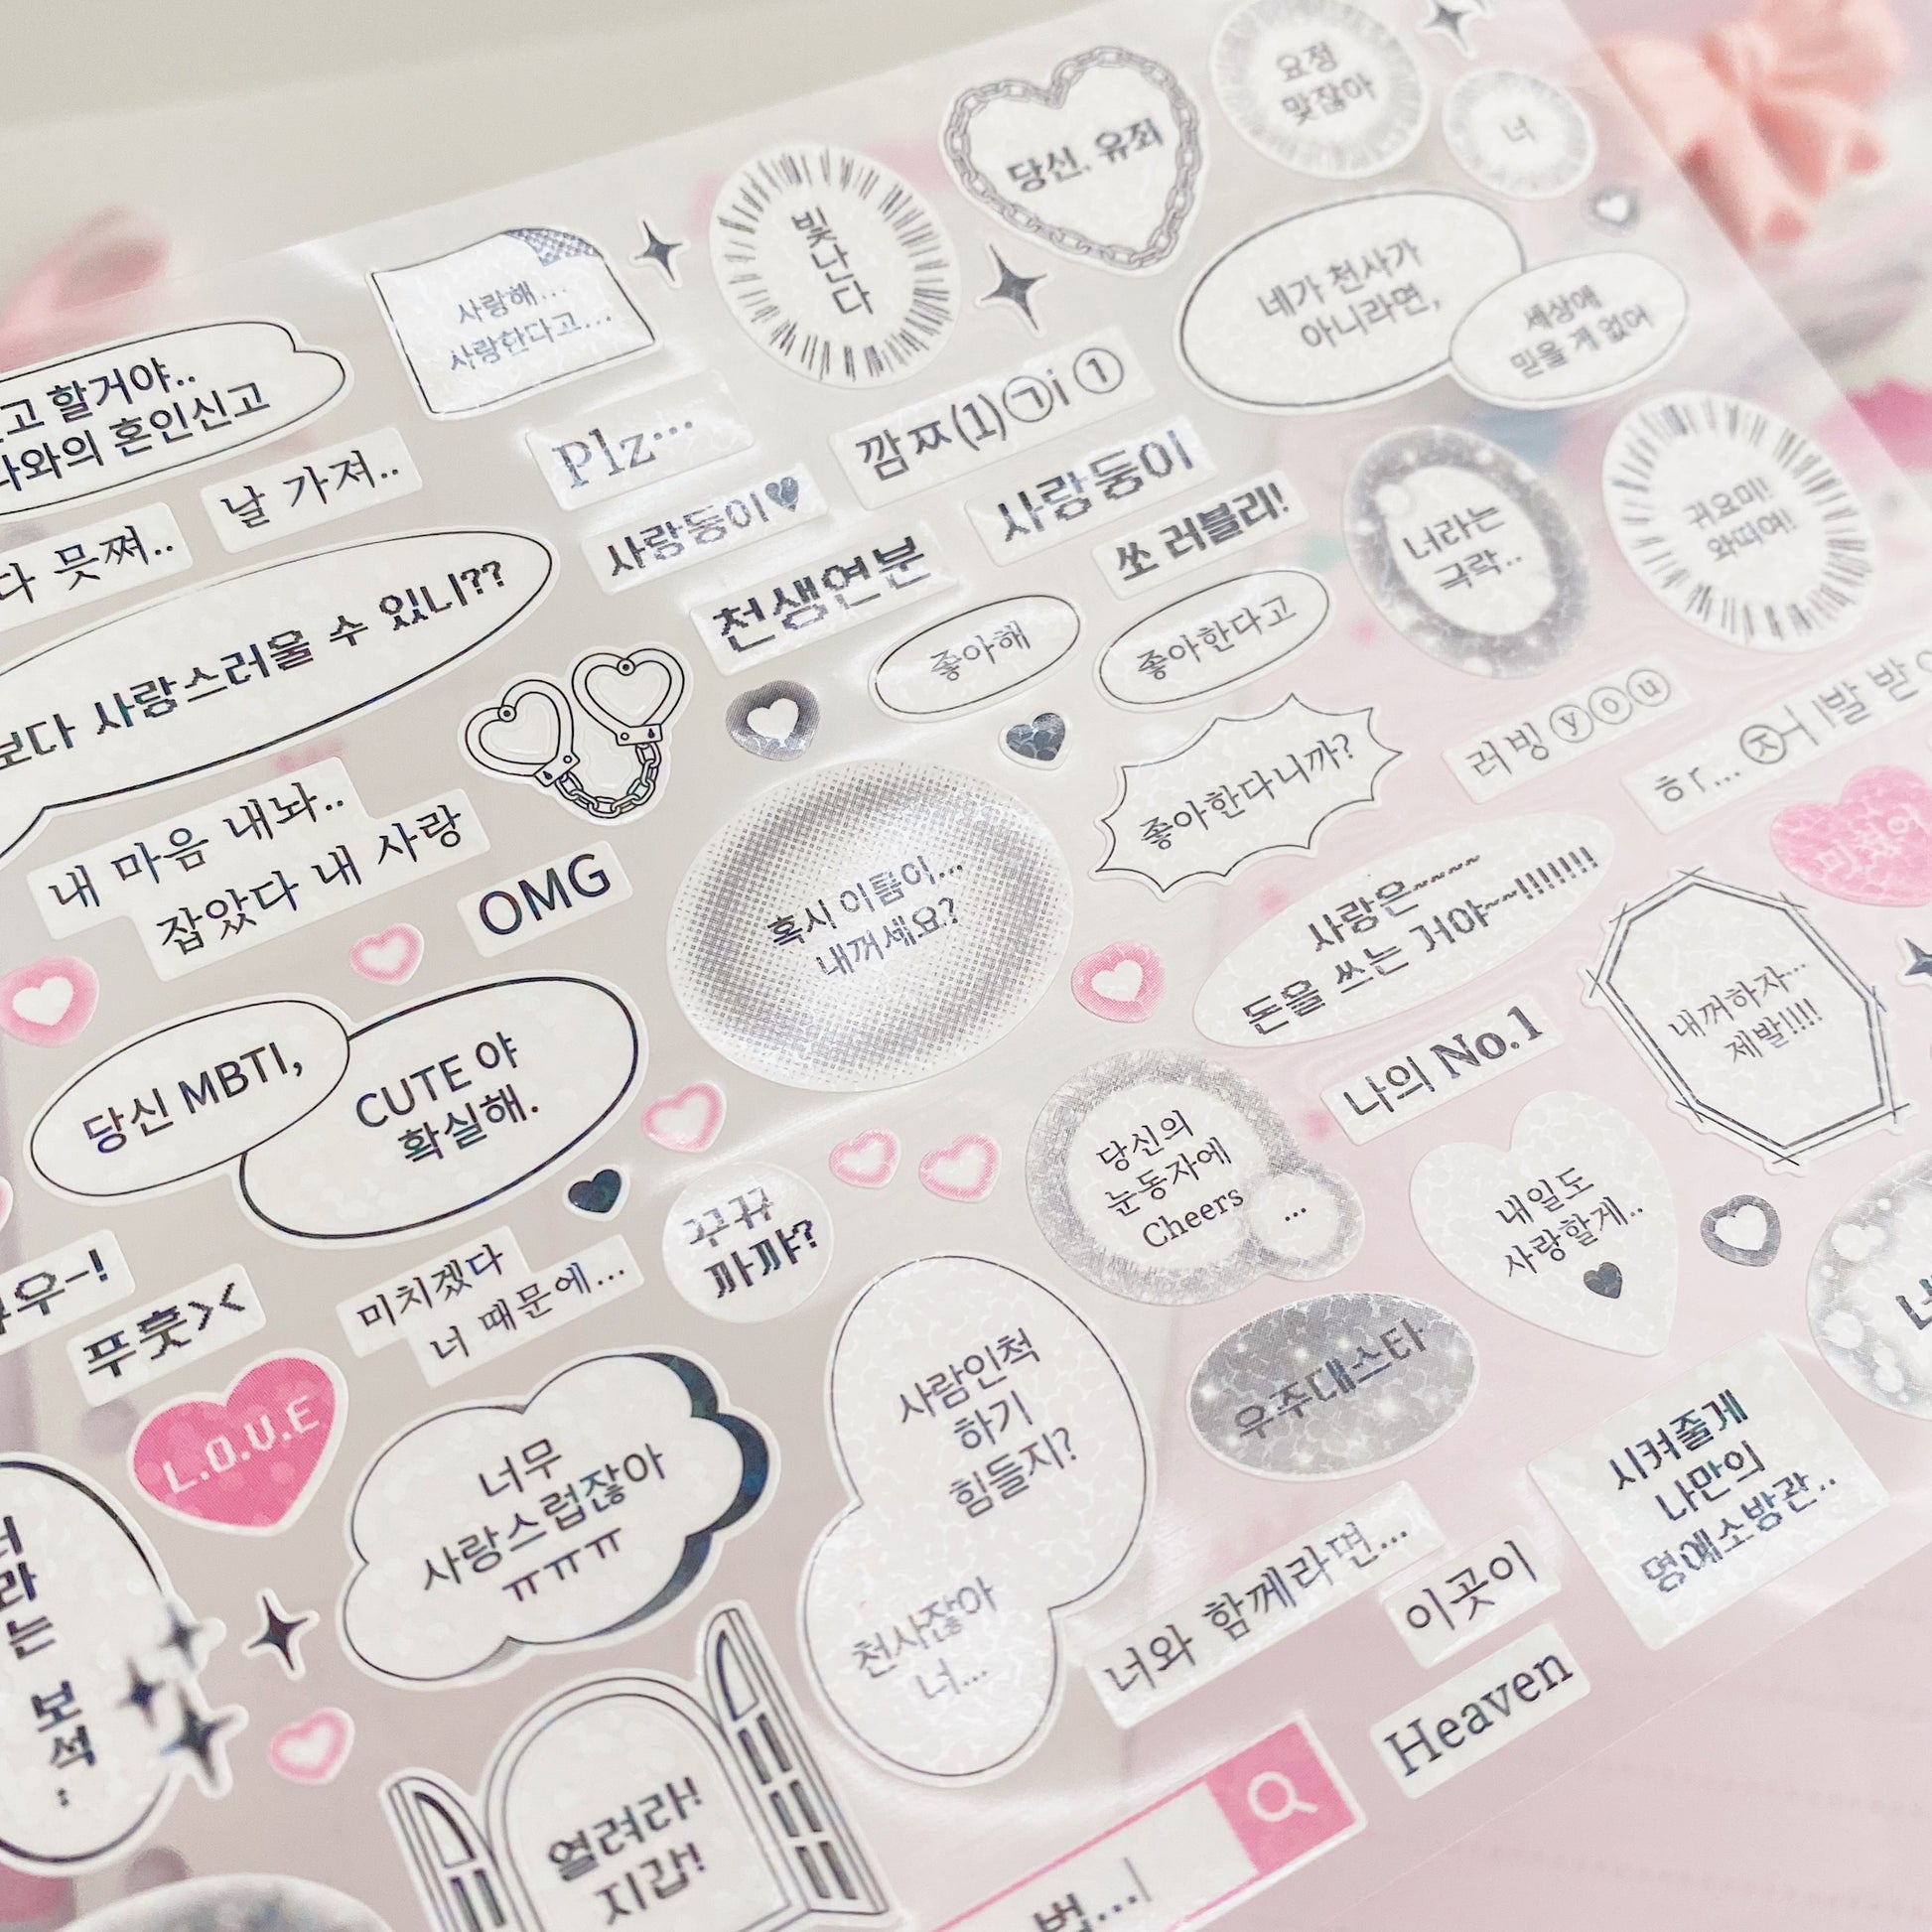 Kpop Polco Letter Stickers Circle Deco Journal Planner Toploader